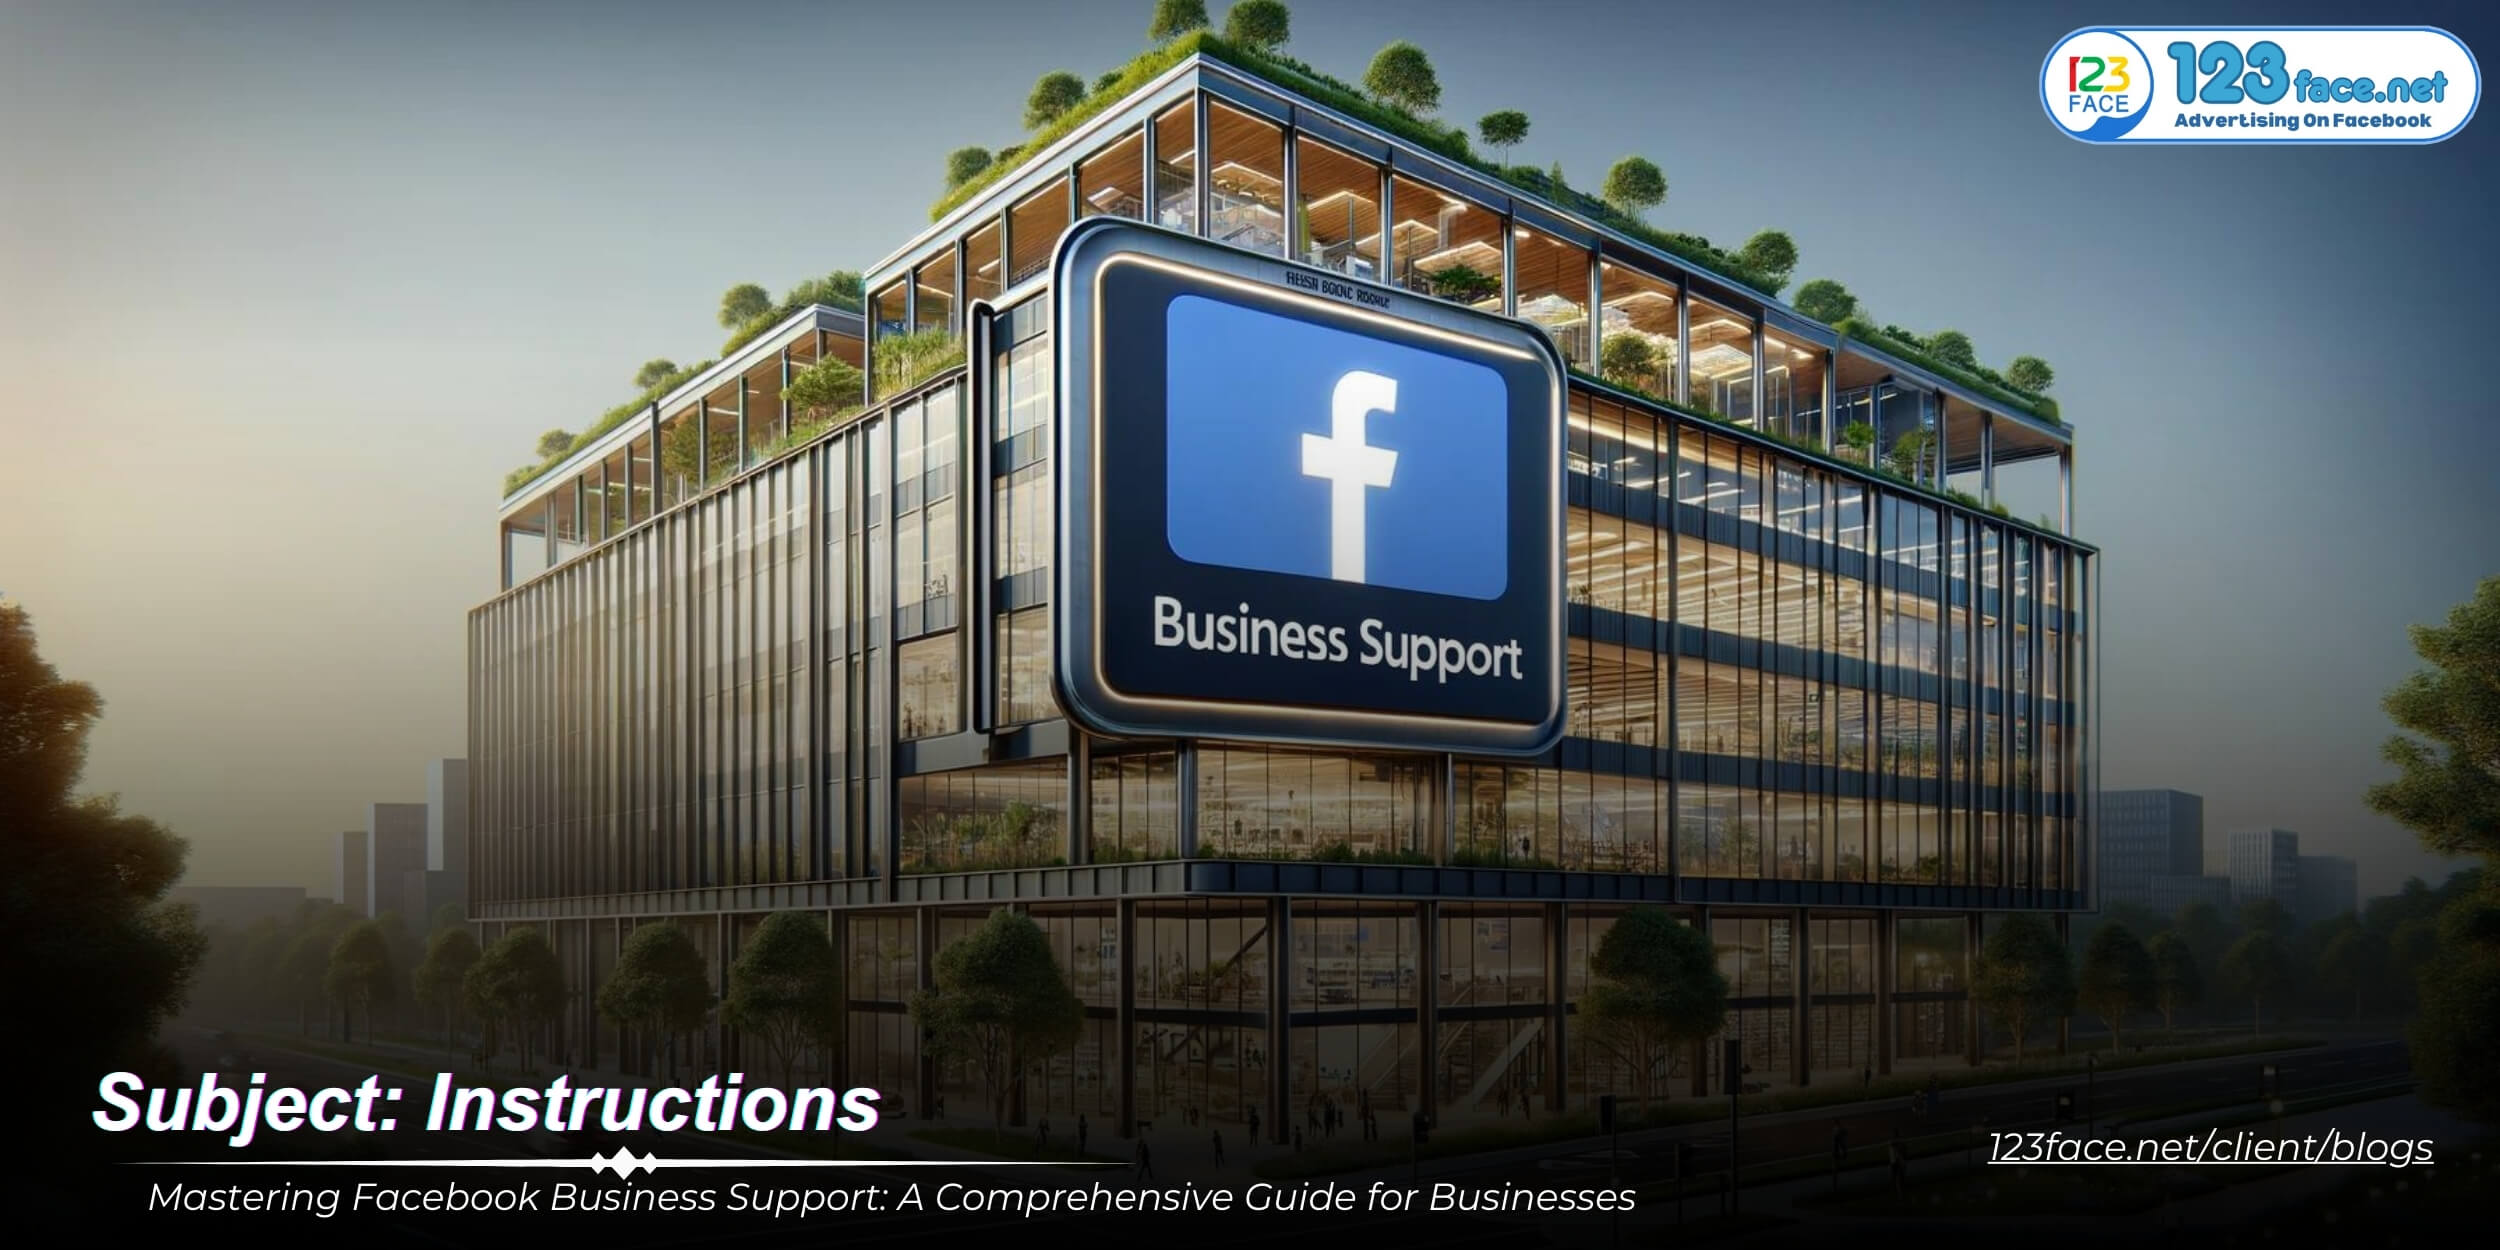 Mastering Facebook Business Support: A Comprehensive Guide for Businesses